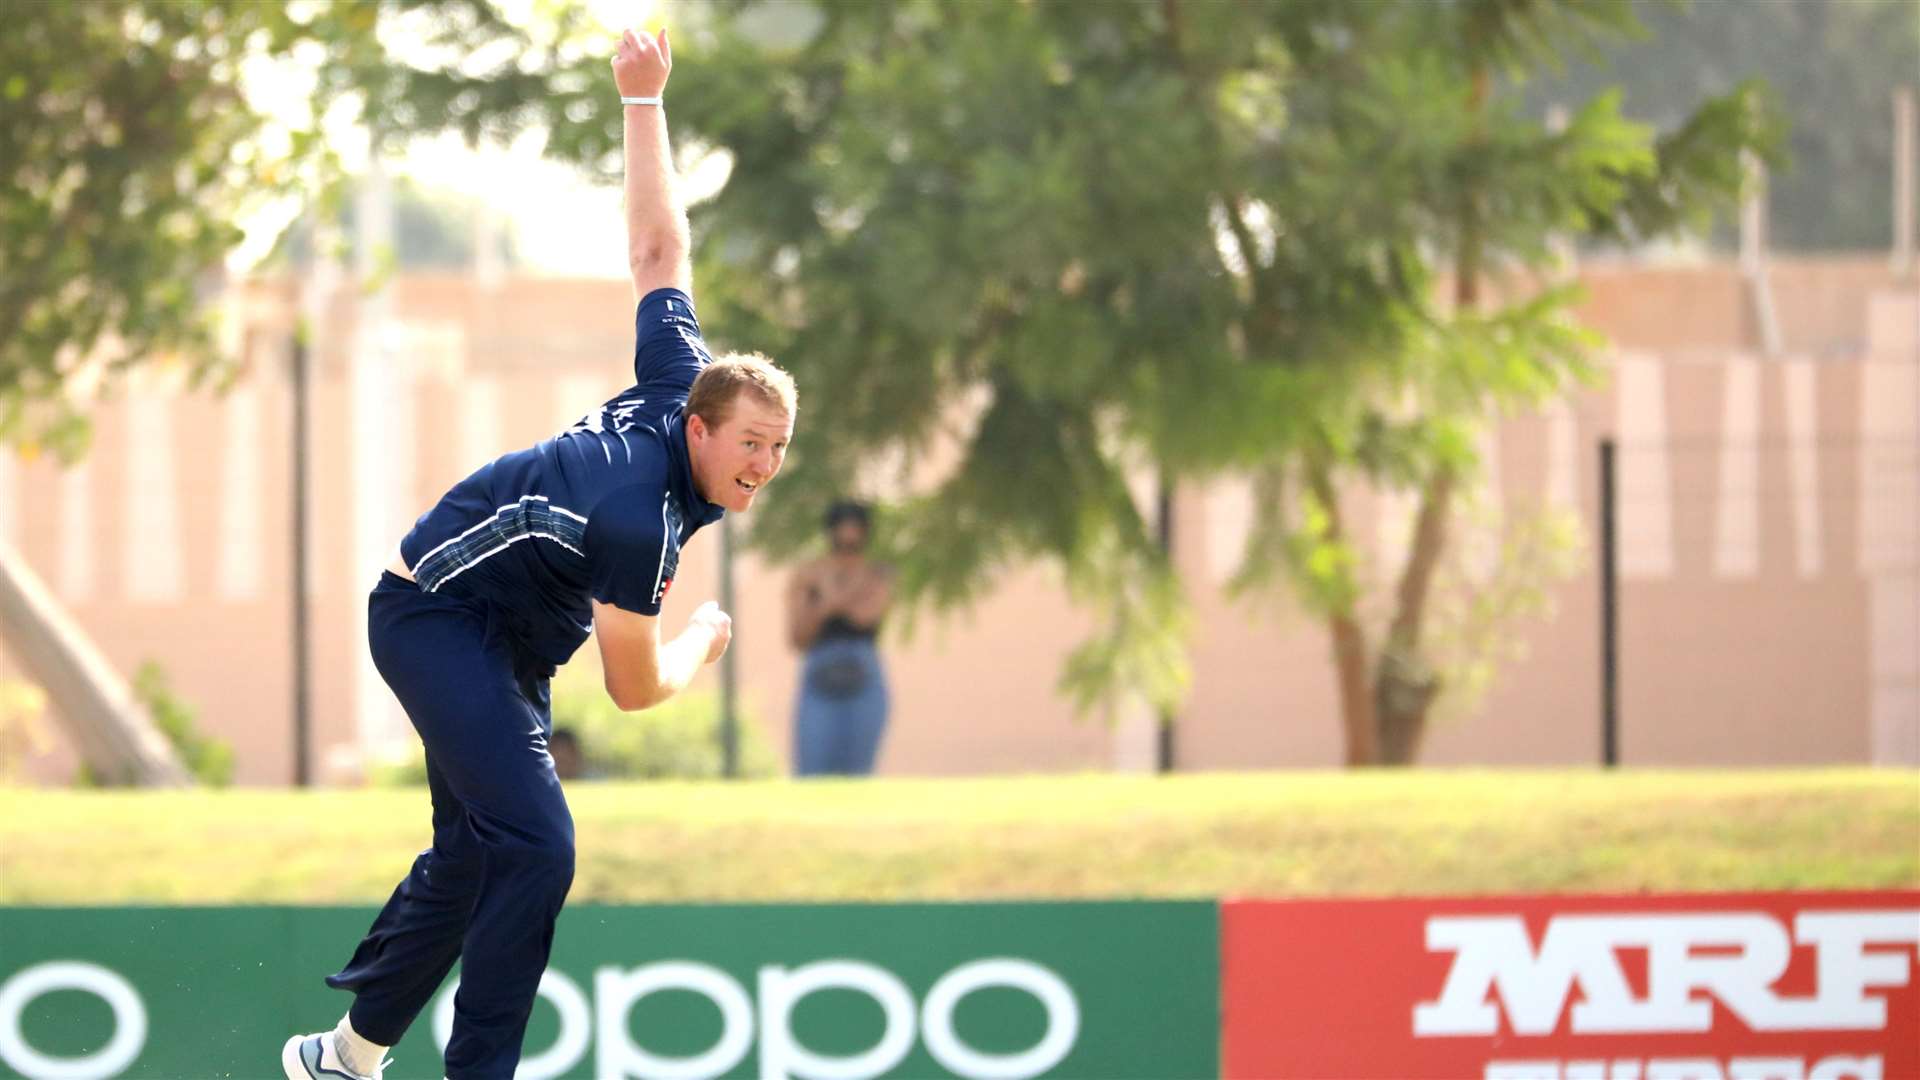 Former Nairn County and Northern Counties cricketer Adrian Neill is playing for Scotland.